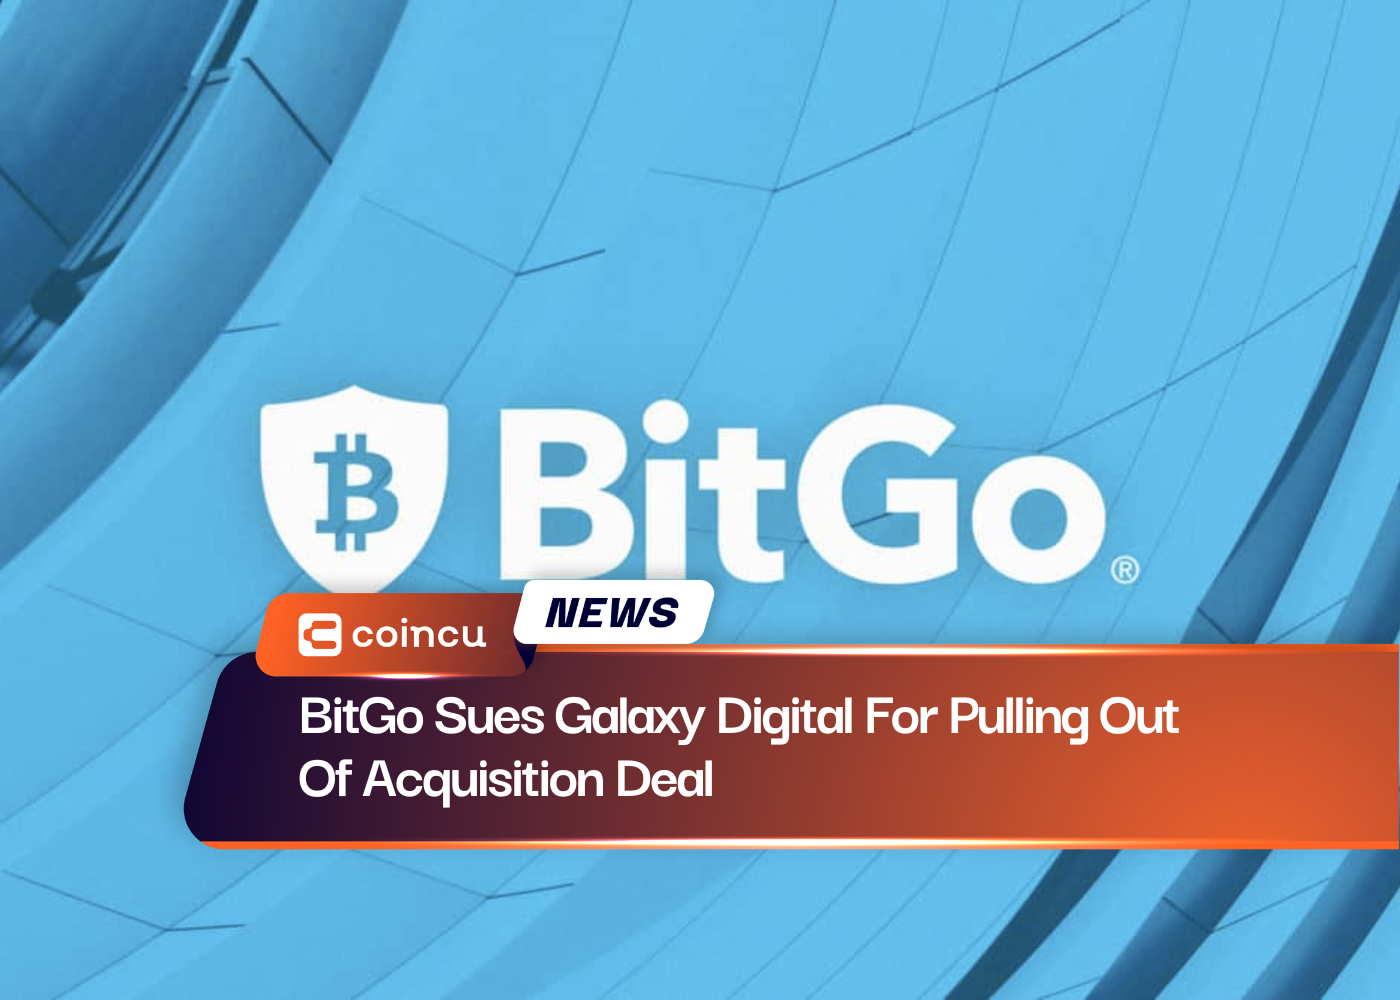 BitGo Sues Galaxy Digital For Pulling Out Of Acquisition Deal